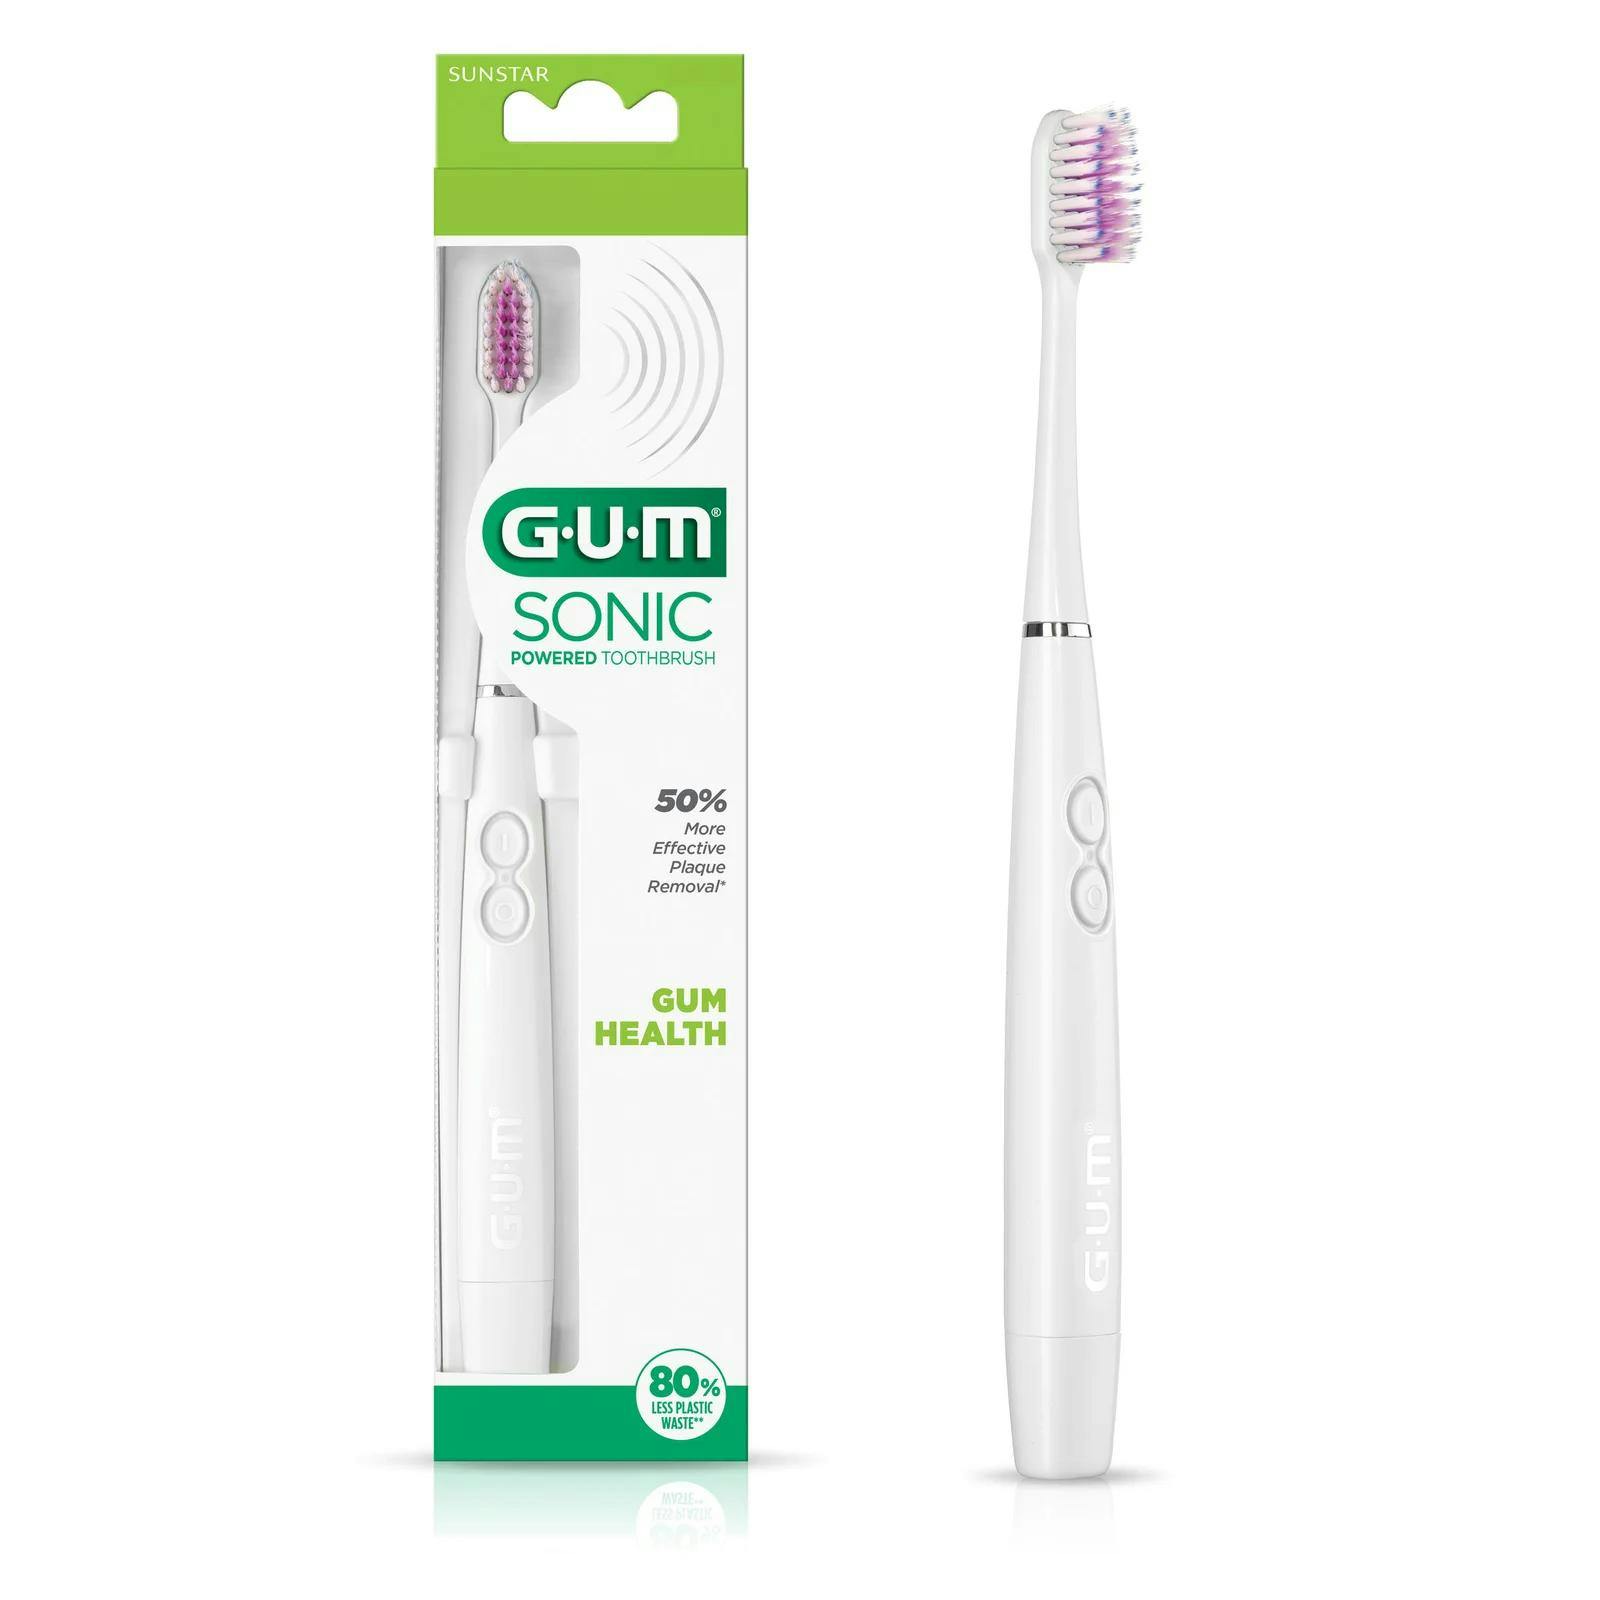 Sunstar Unveils New Battery-powered Toothbrush at Chicago Midwinter | Image Credit: © Sunstar